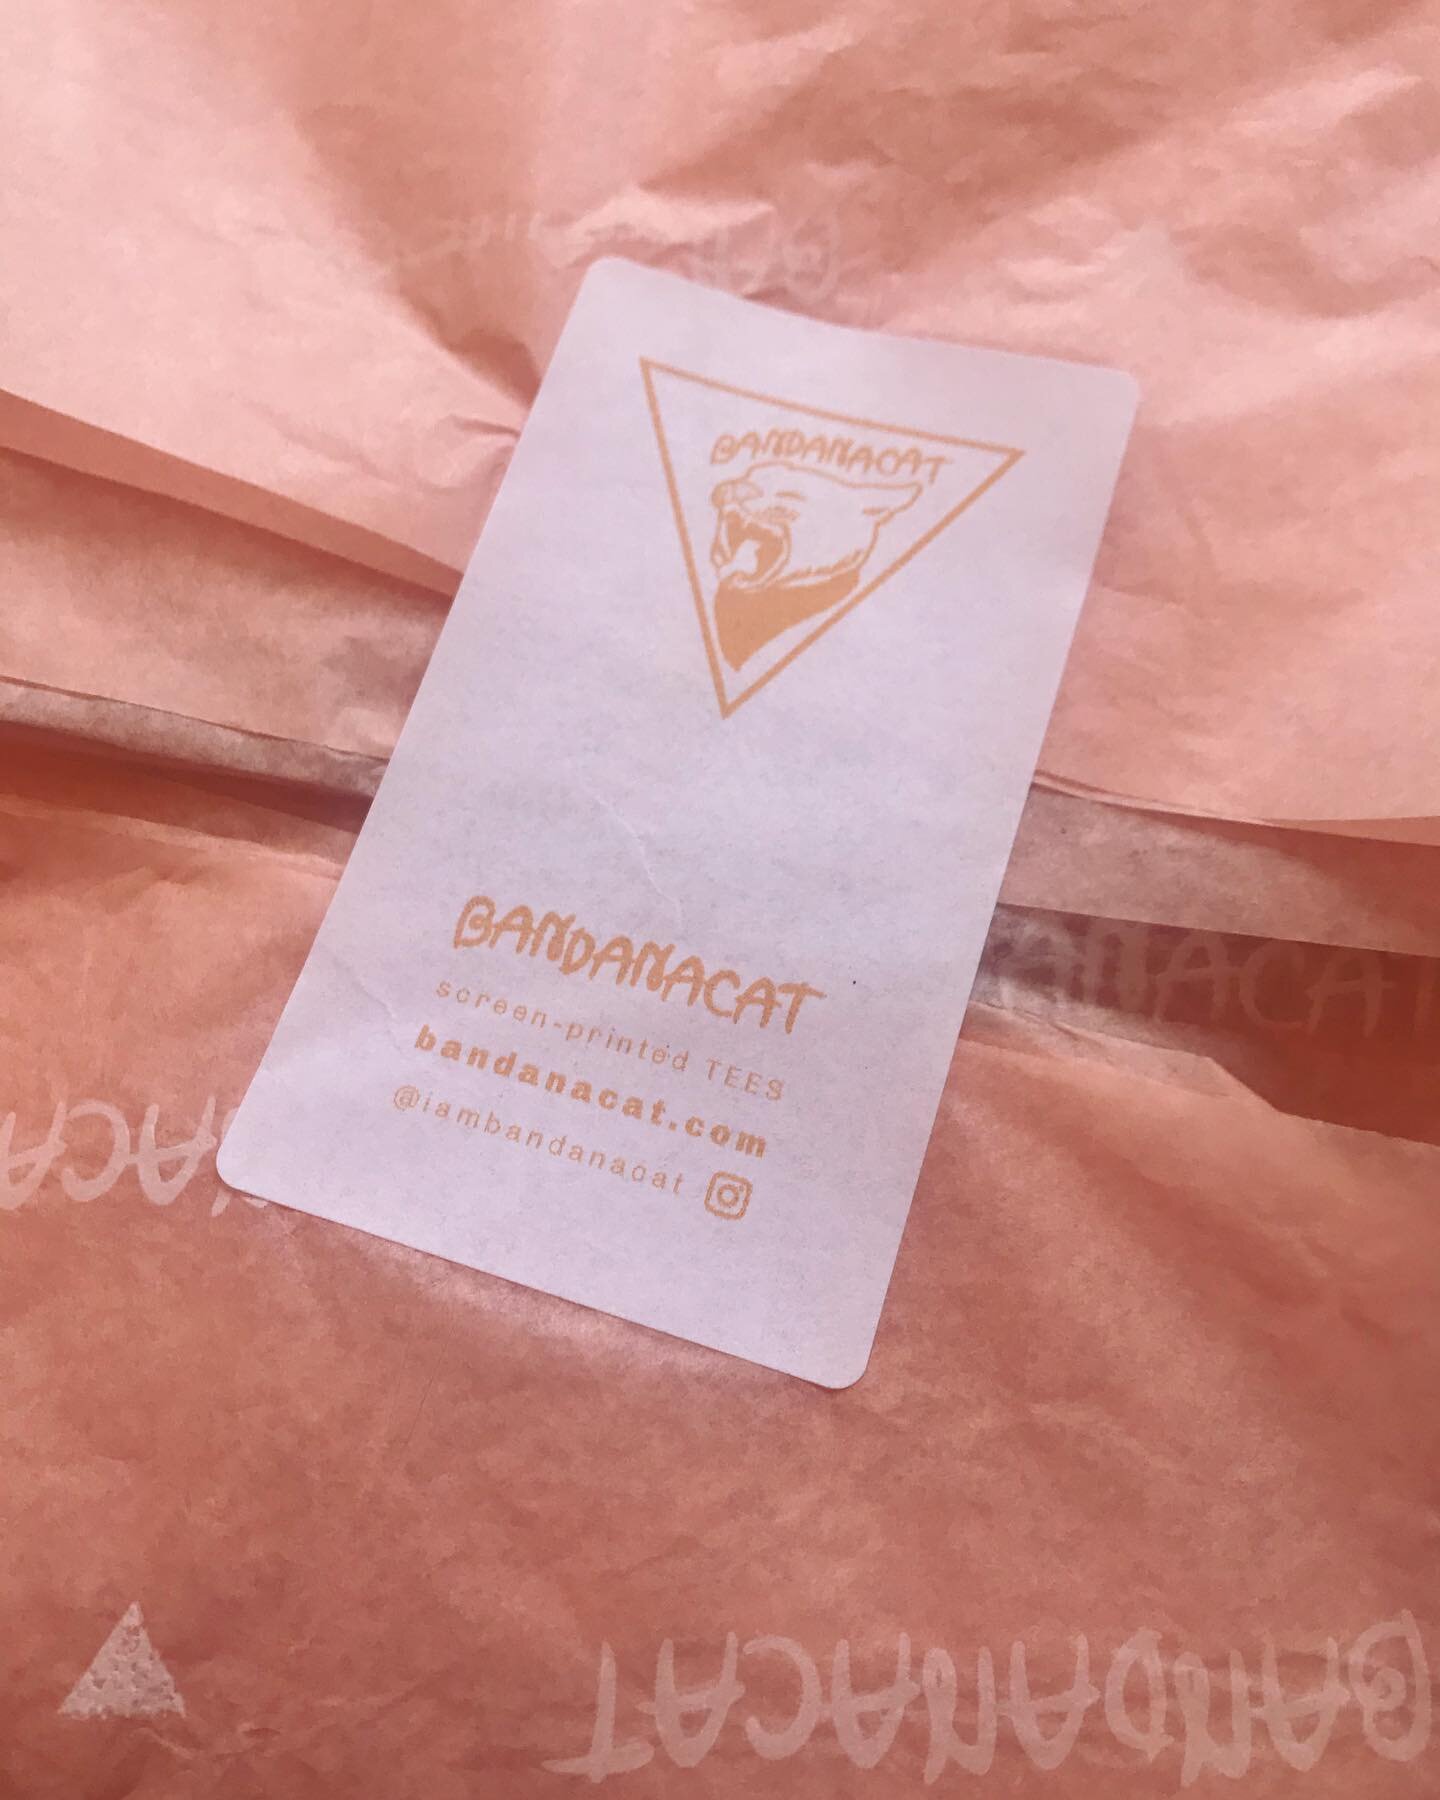 YAY! Another Depop Order 🥳 Check us out on @depop for more screen printed goodness 🍑 

#uniquefashion #blackownedbusiness #screenprinting